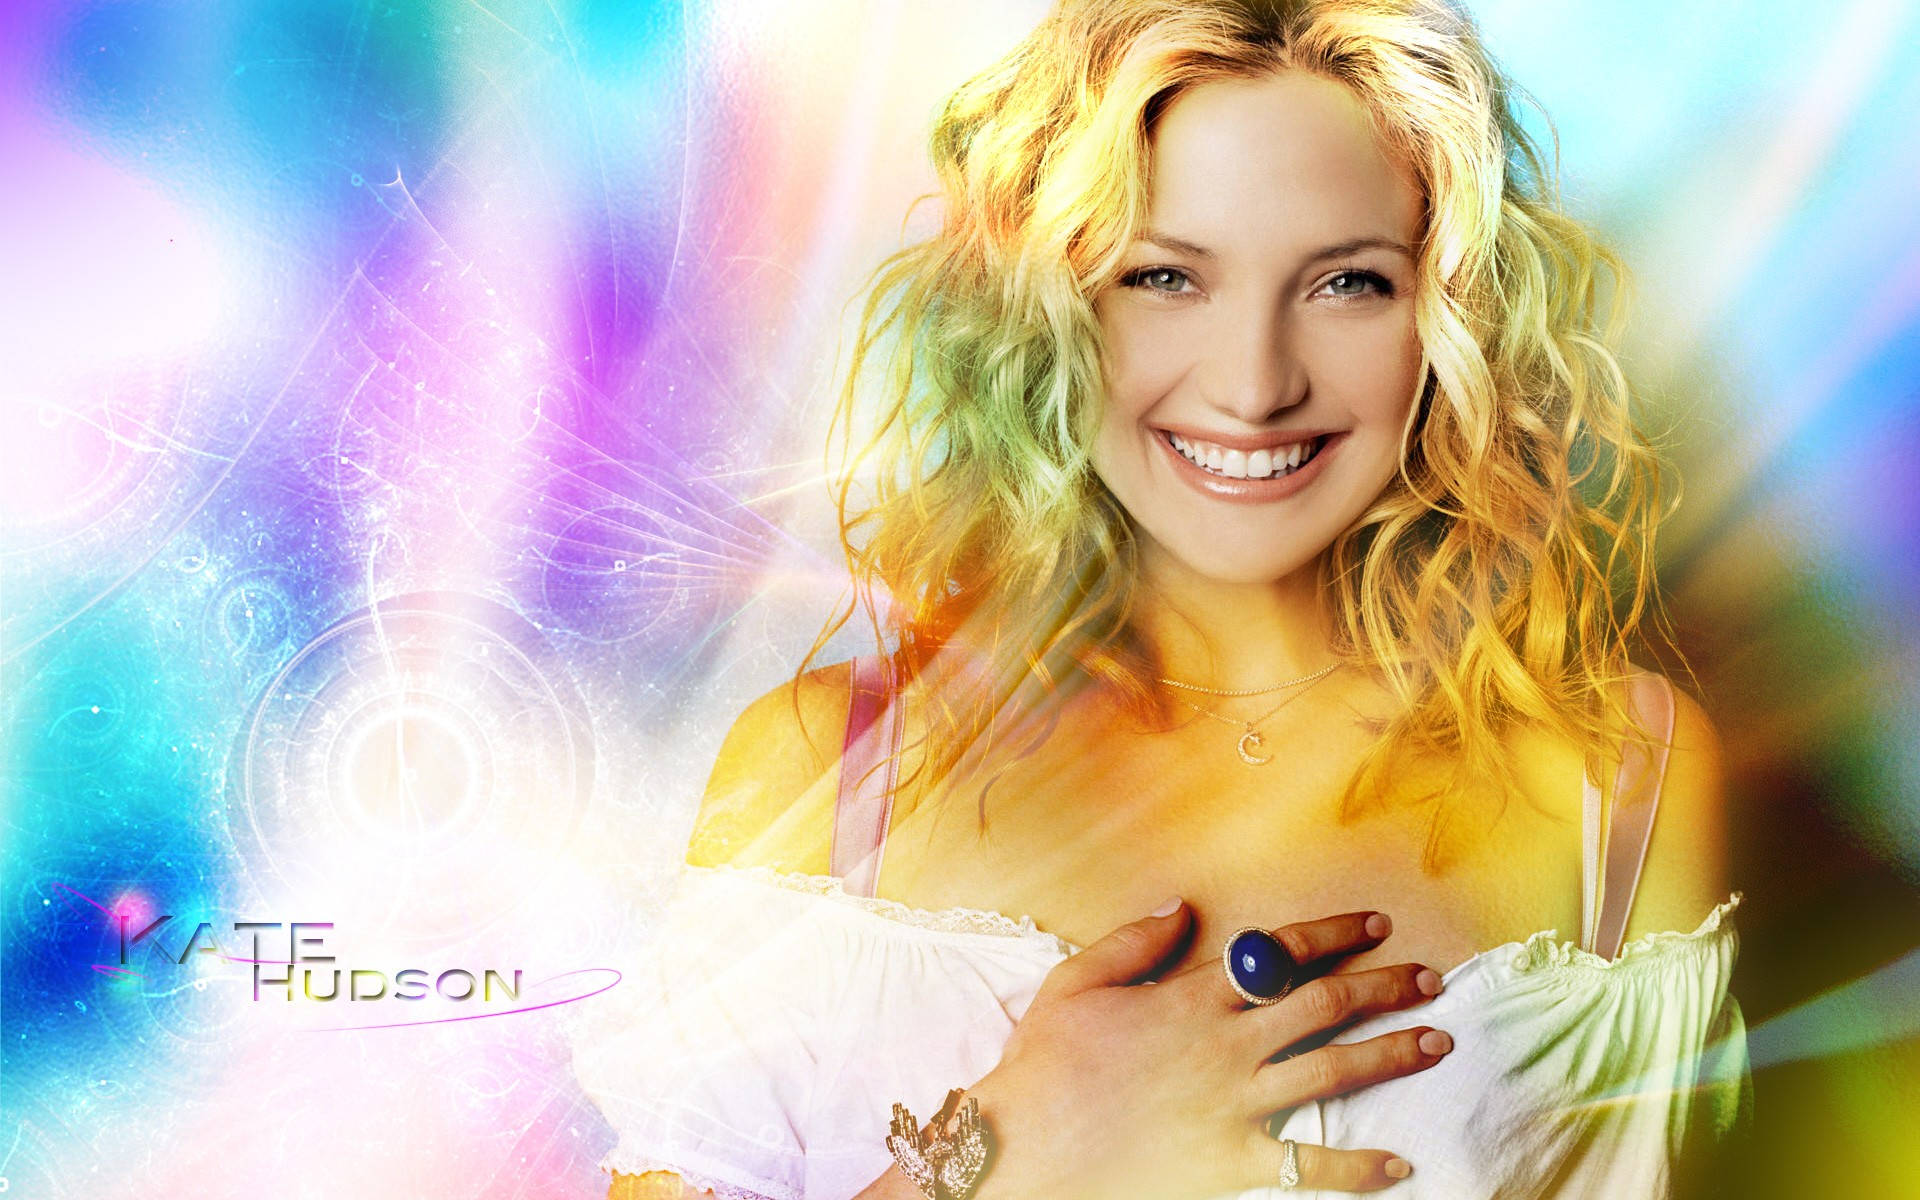 Fairyrainbow Kate Hudson Would Be Translated To Spanish As 